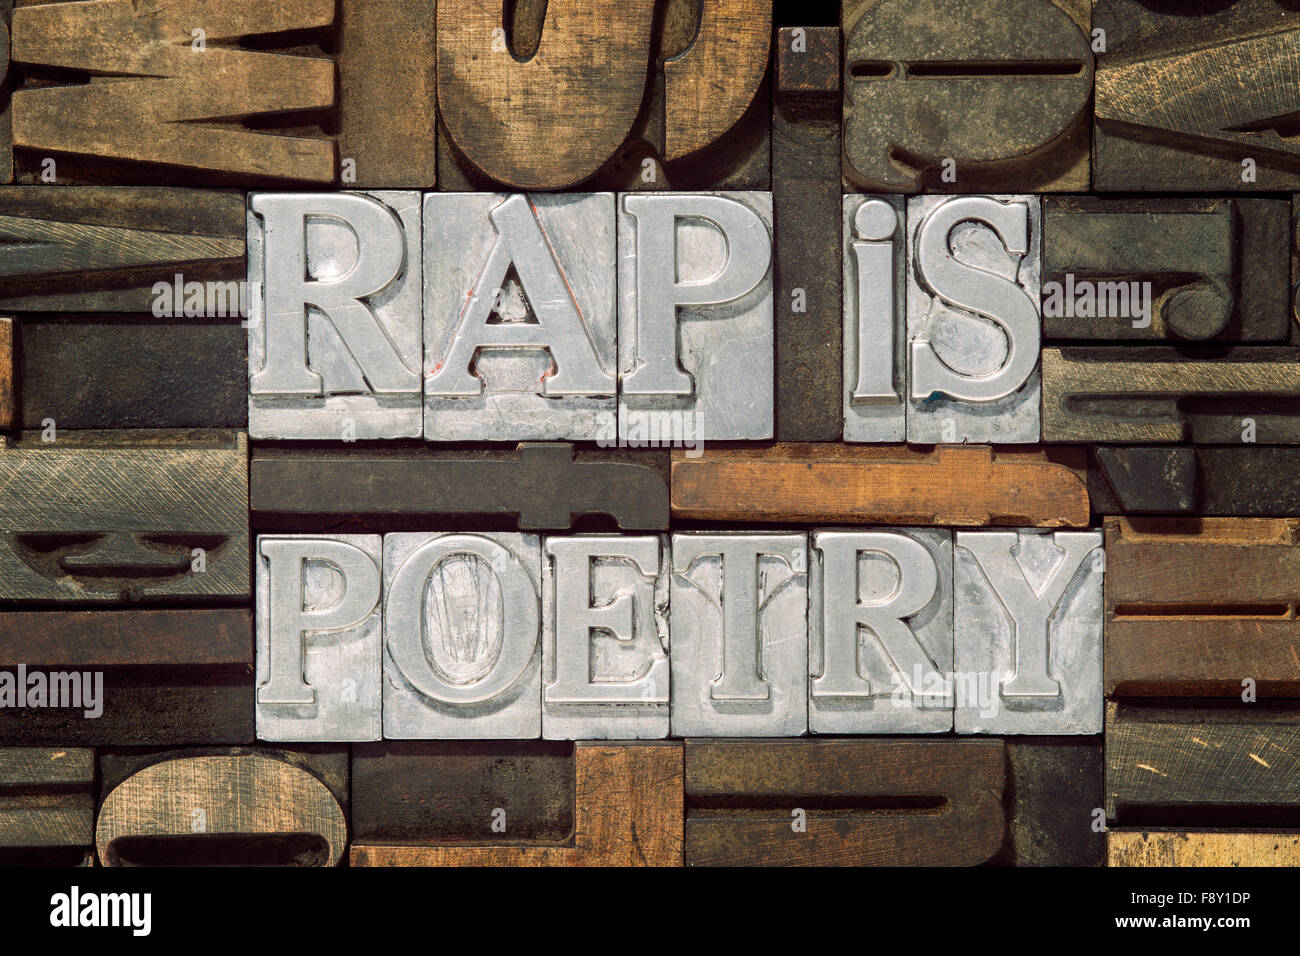 rap is poetry phrase made from metallic letterpress blocks in mixed wooden letters Stock Photo